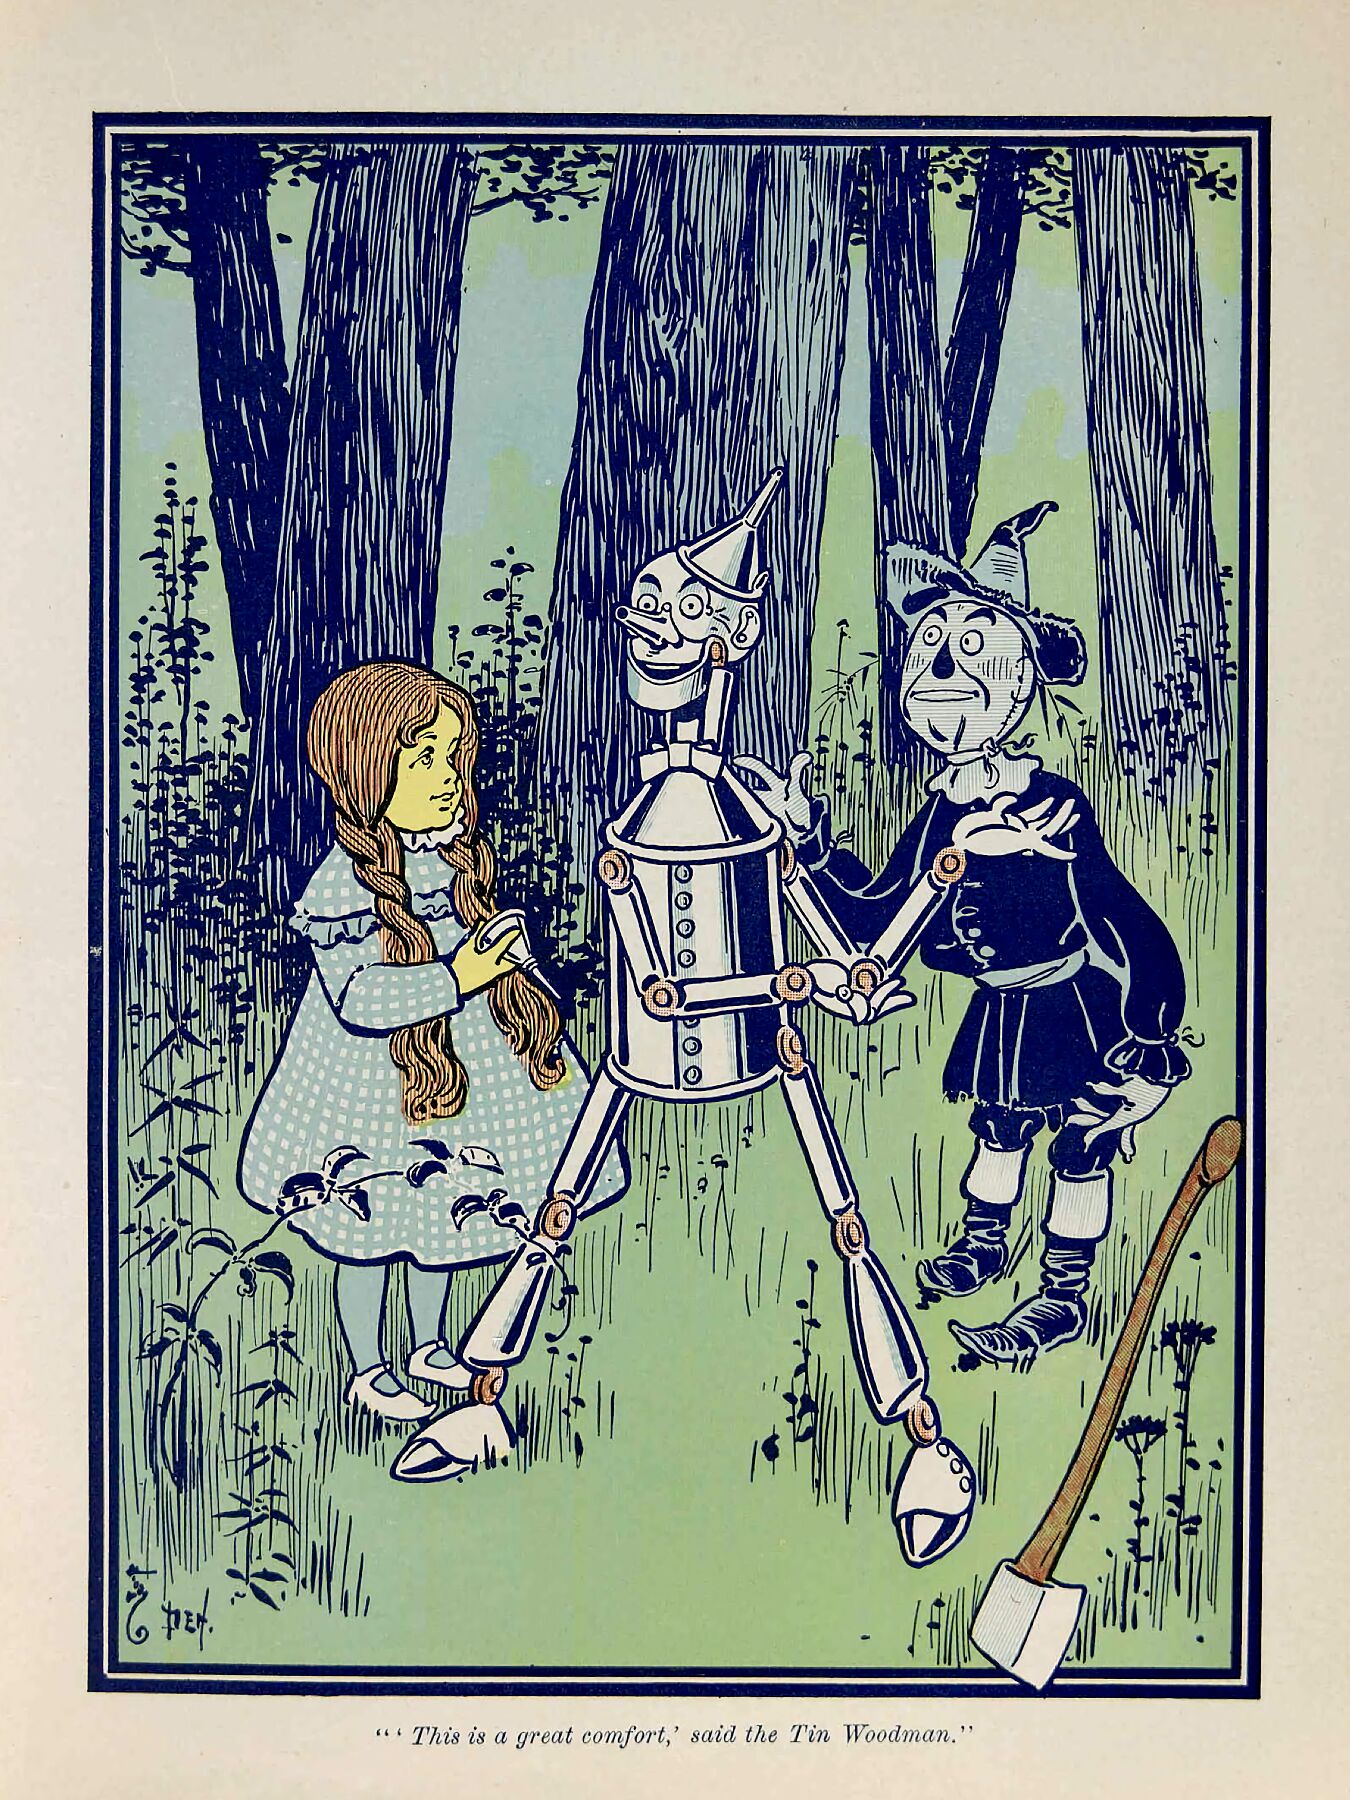 This is a Great Comfort, said the Tin Woodman by W. W. Denslow for the Wonderful Wizard of Oz - 1900